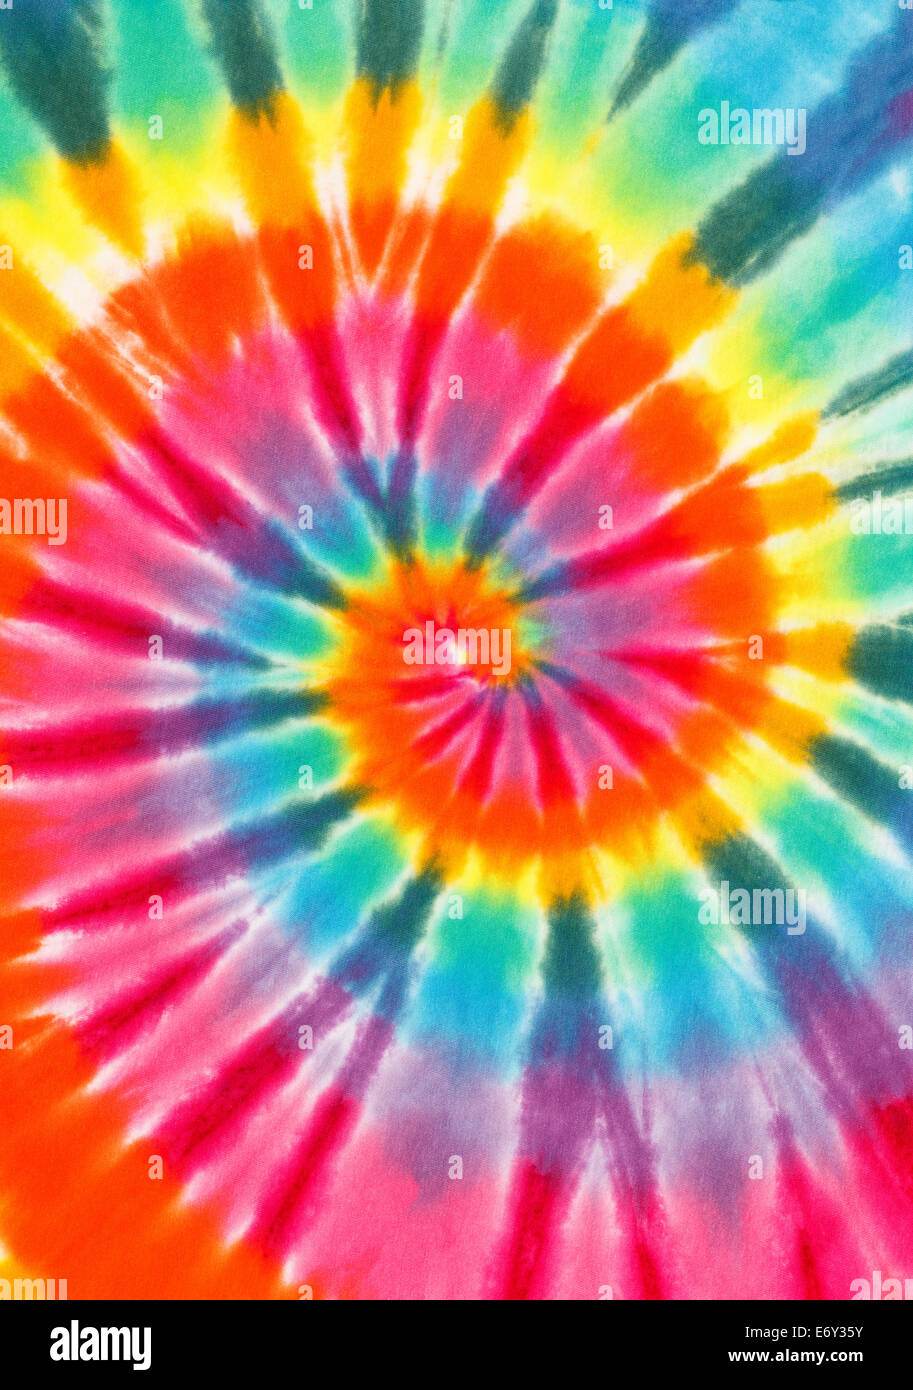 Rainbow Color Spiral Fabric Isolated on White Background. Stock Photo